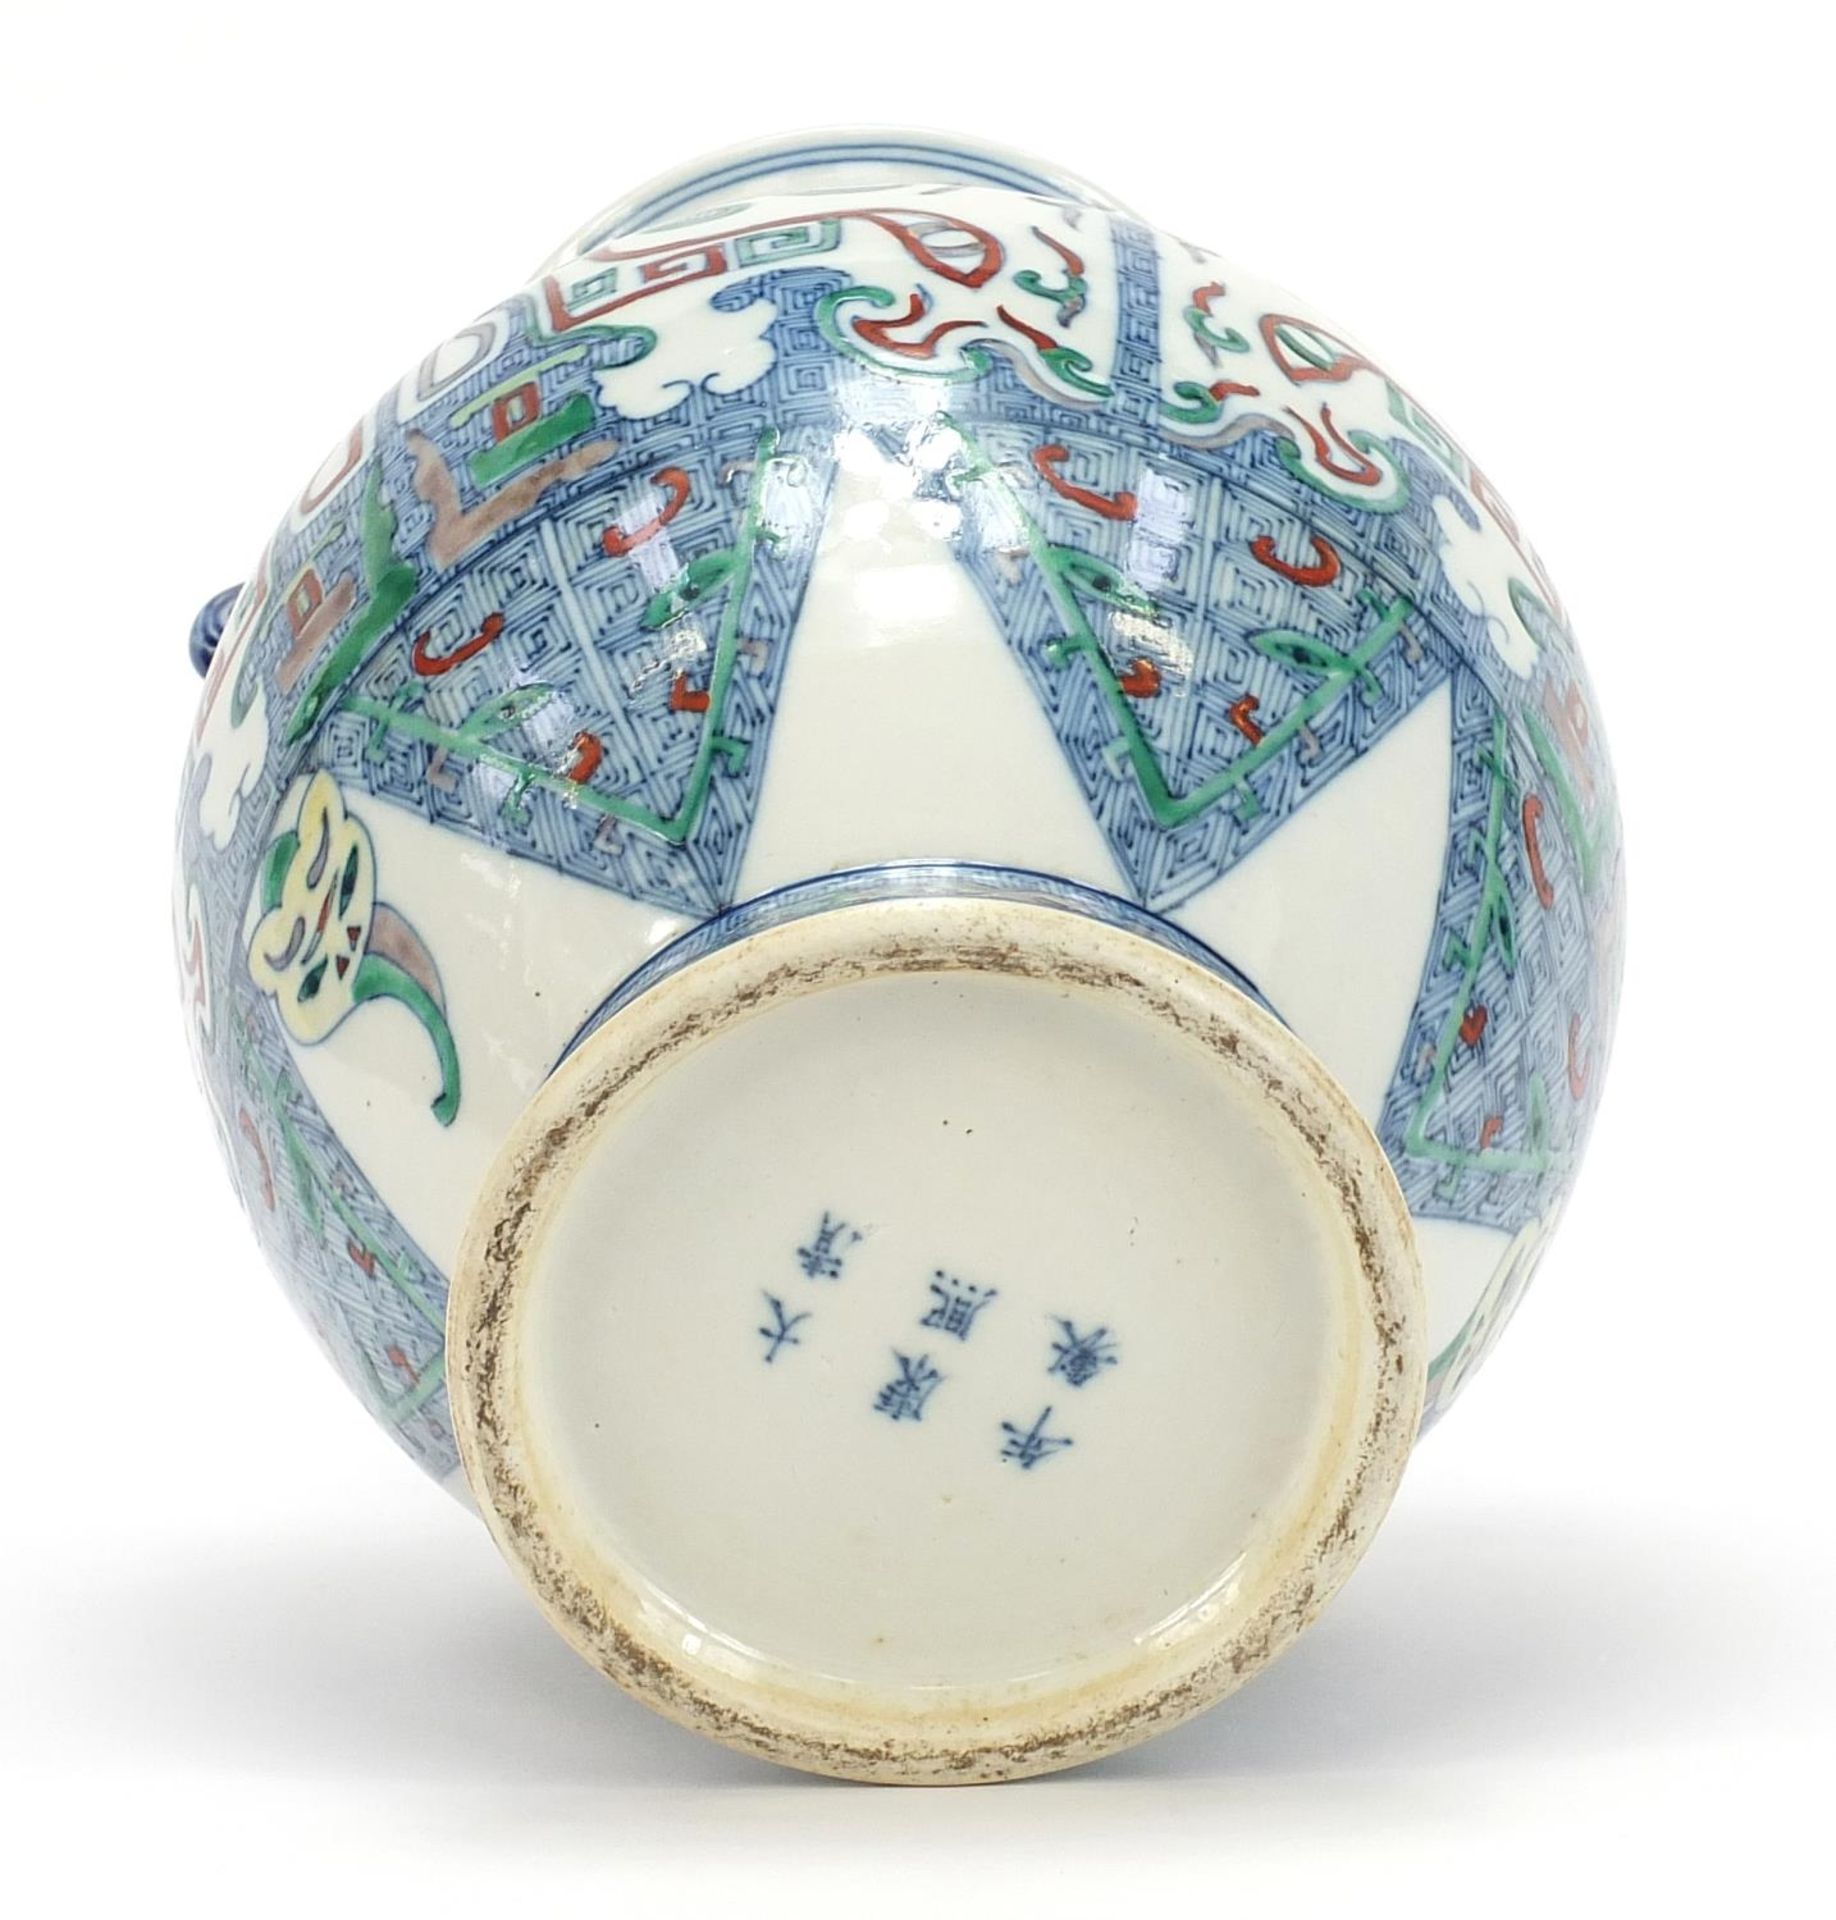 Chinese doucai porcelain vase with handles, hand painted with mythical faces and heads, six figure - Image 8 of 10